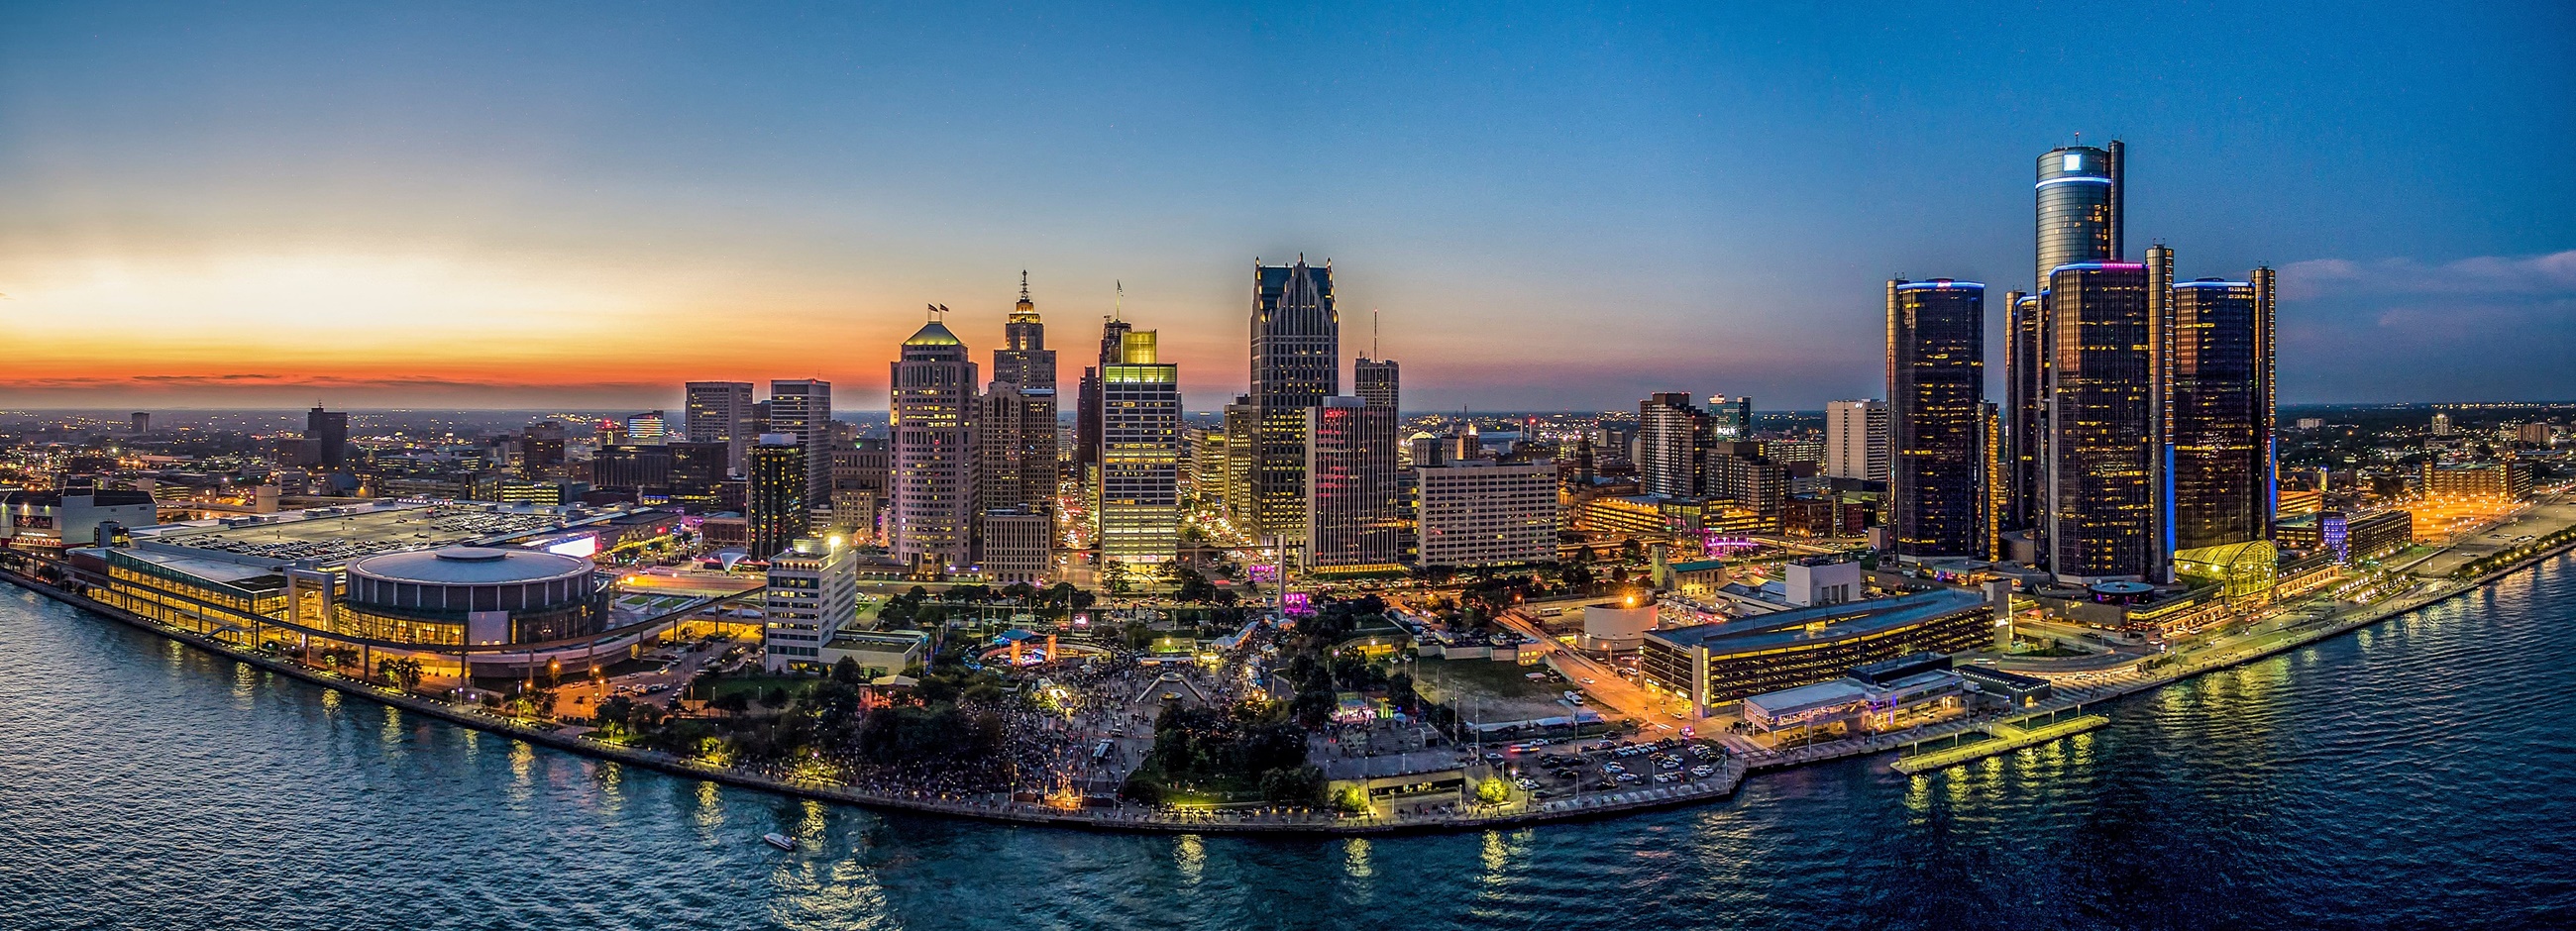 Top 10 Reasons to Meet and Play in Detroit